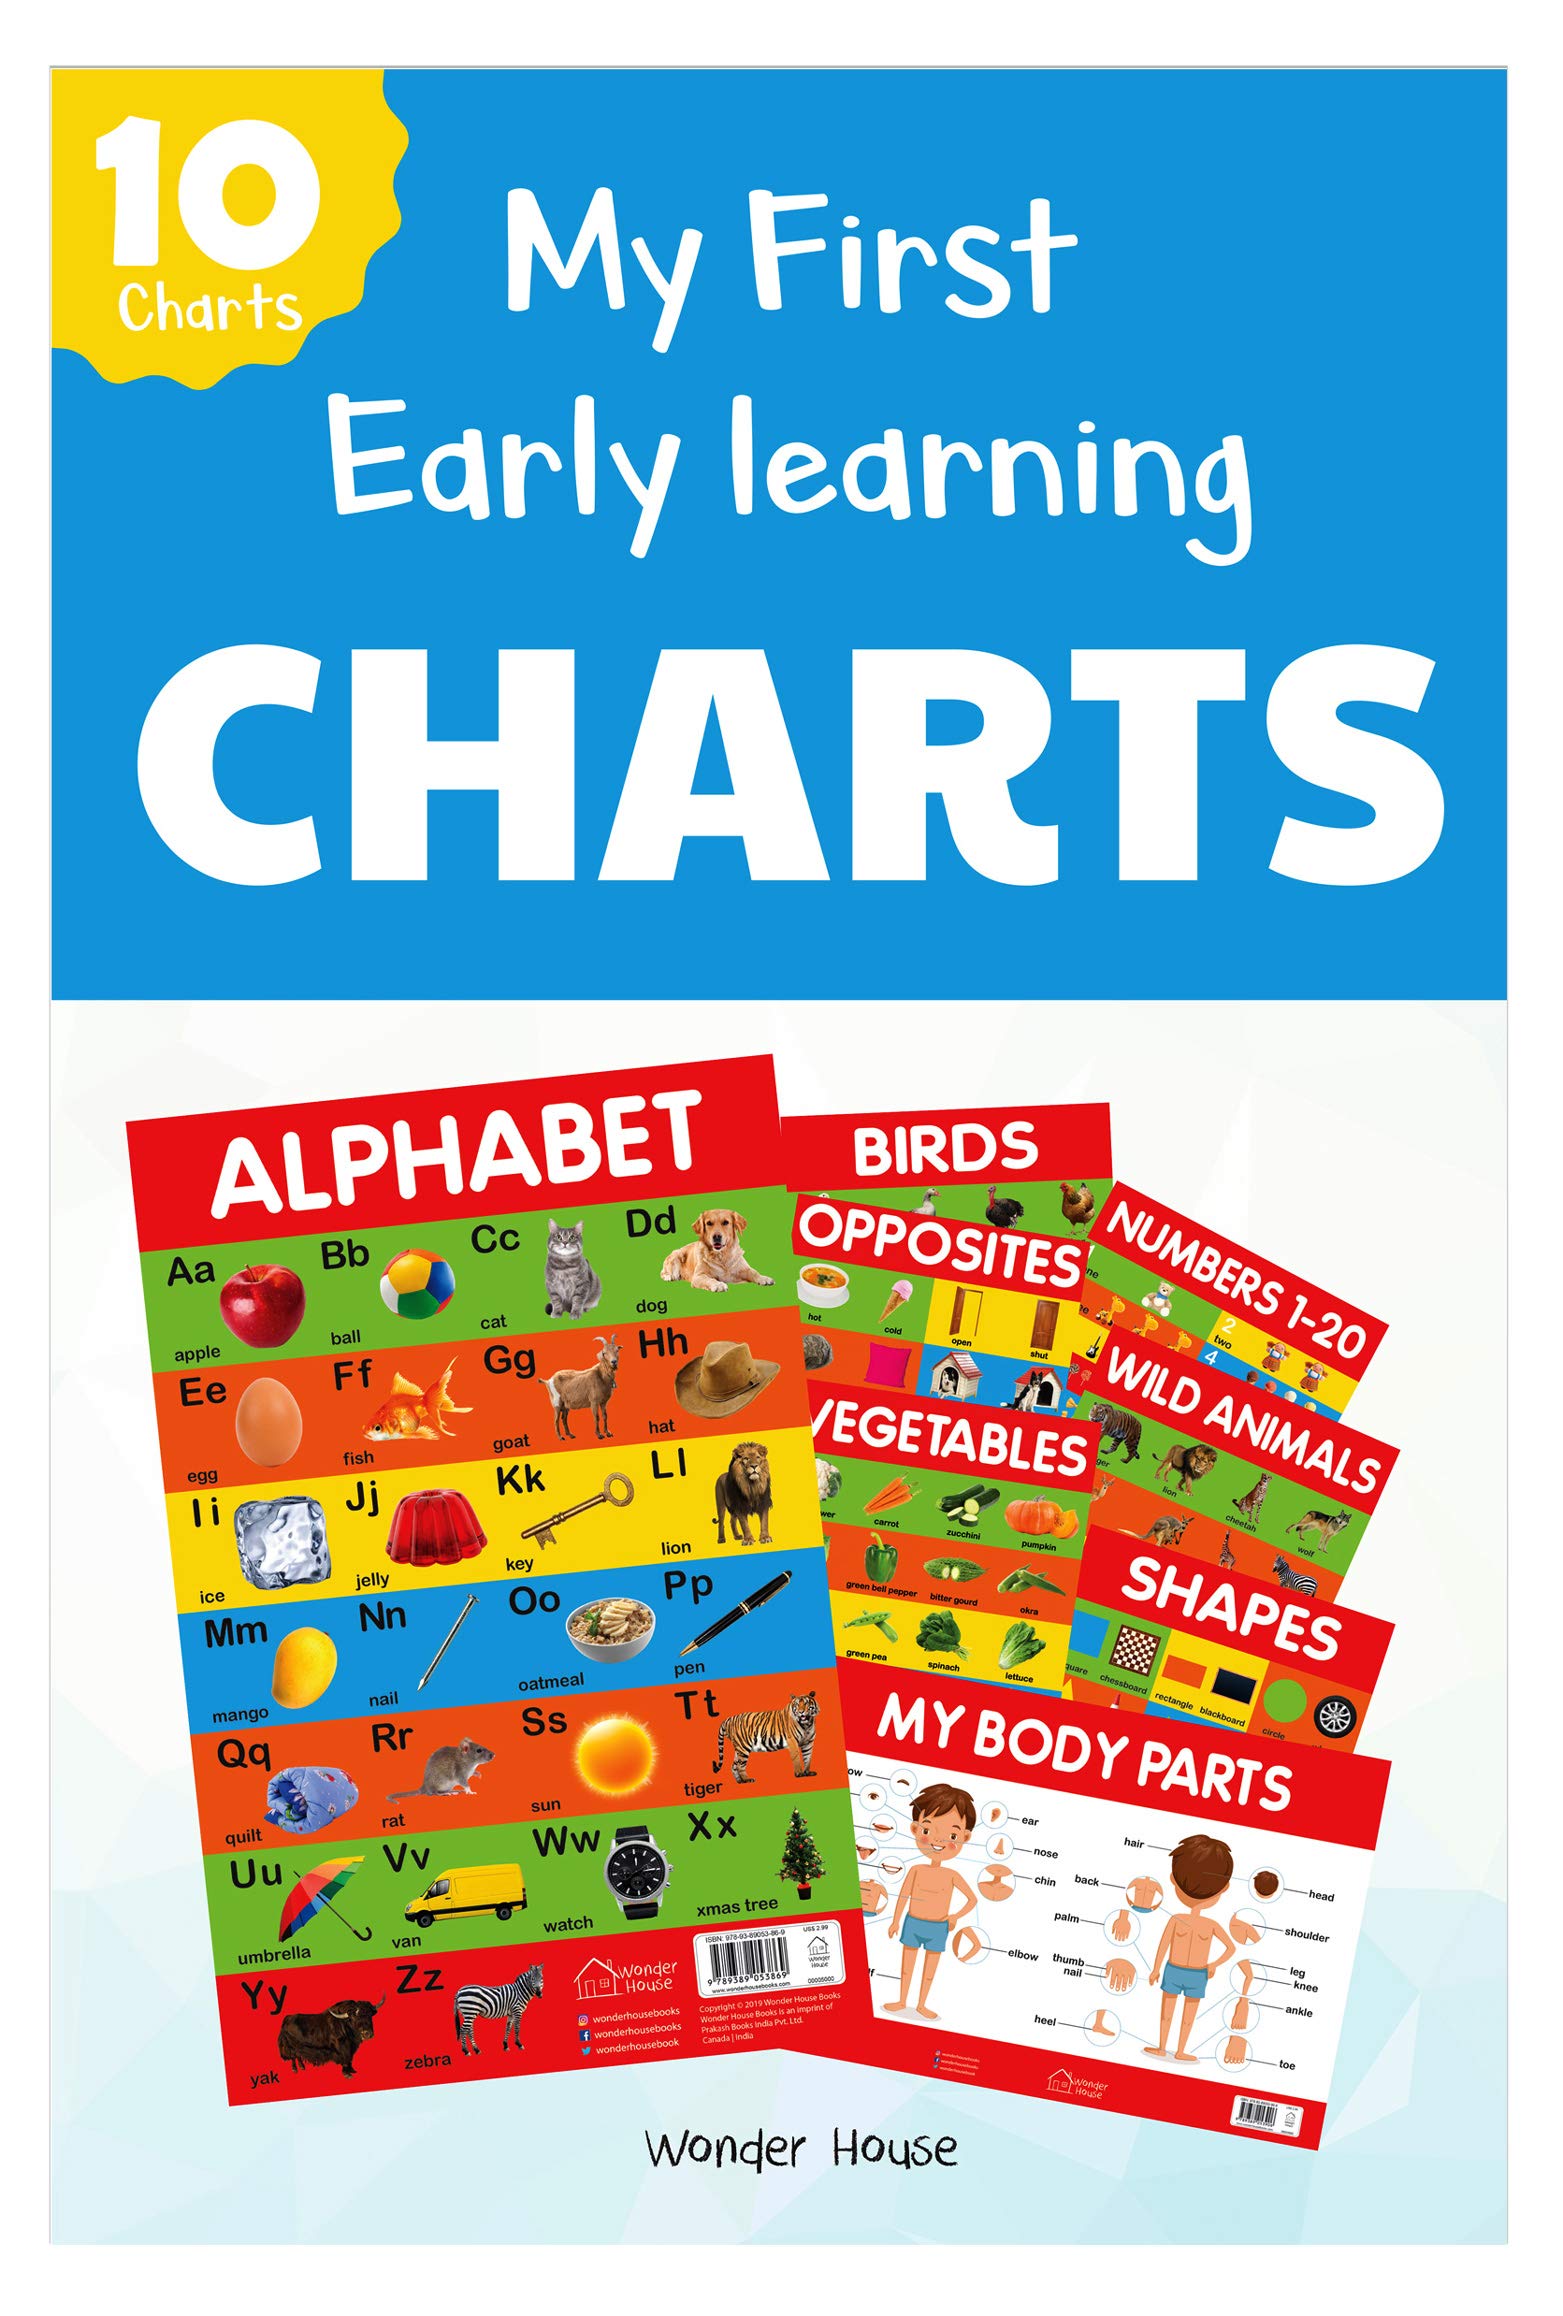 My First Early Learning Charts set of 10 charts